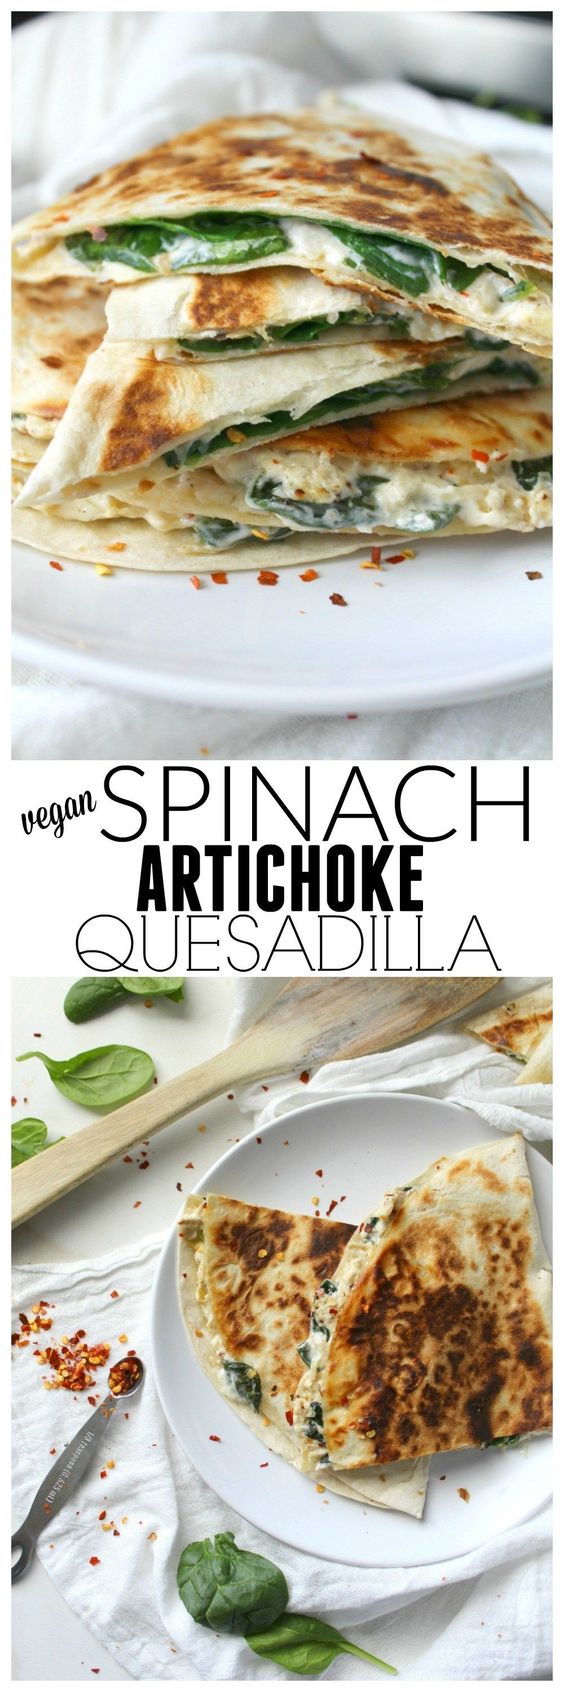 Two favorite snacks are combined into one with these Vegan Spinach Artichoke Quesadillas. These are ooey, gooey and super delicious | ThisSavoryVegan.com